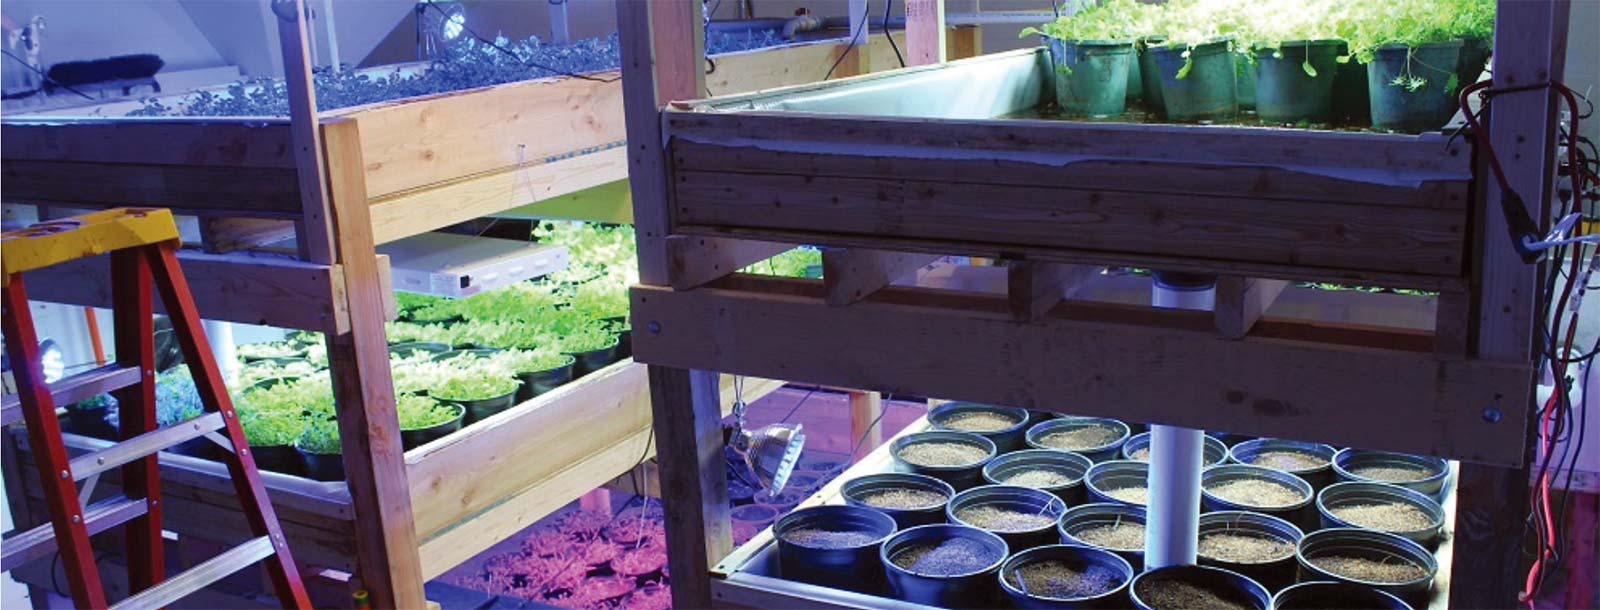 A soil-based aquaponics system is being used at The Farmory, a non-profi t operation housed in the old Green Bay Armory that is working to create sustainable, indoor year-round farming. Contributed photo